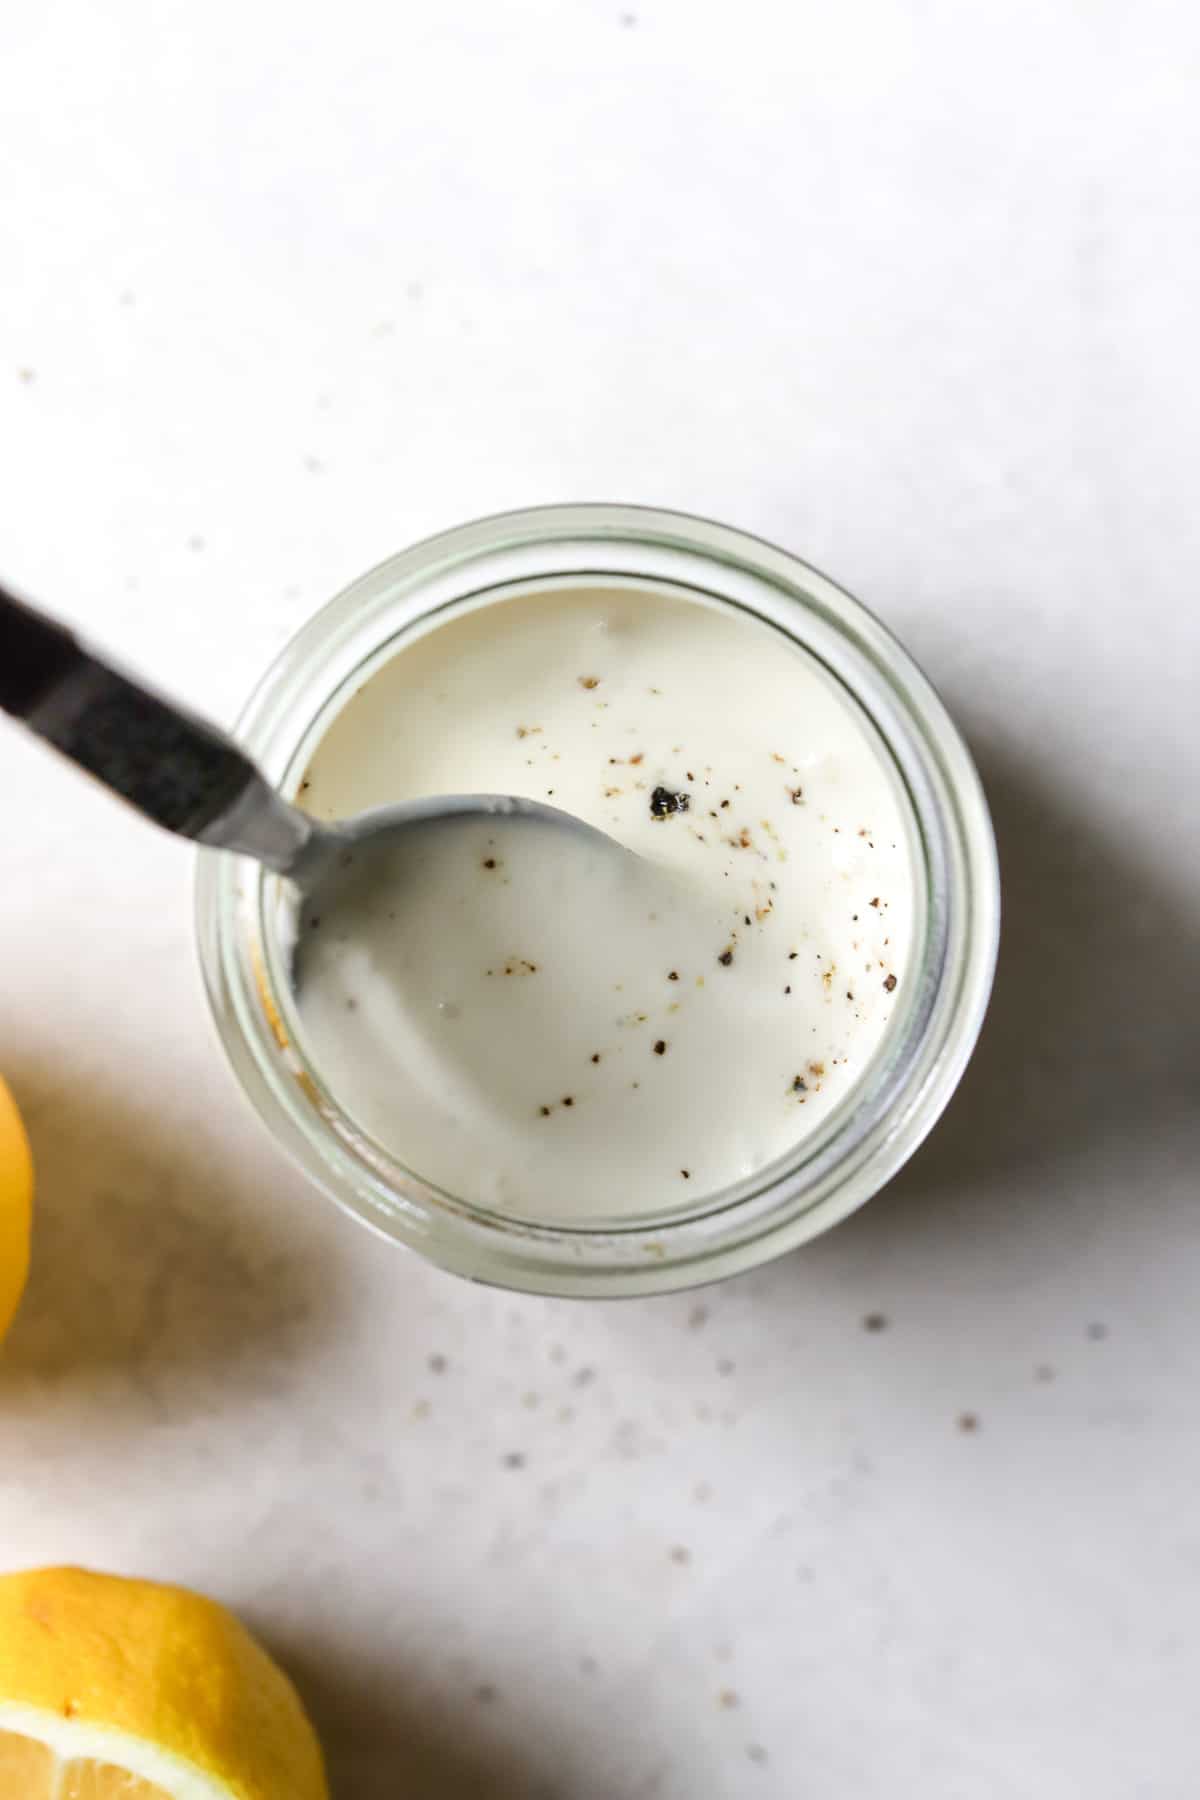 Caesar dressing in small glass jar with freshly cracked pepper on top, being lightly stirred by a spoon, on light gray surface with lemons on side.